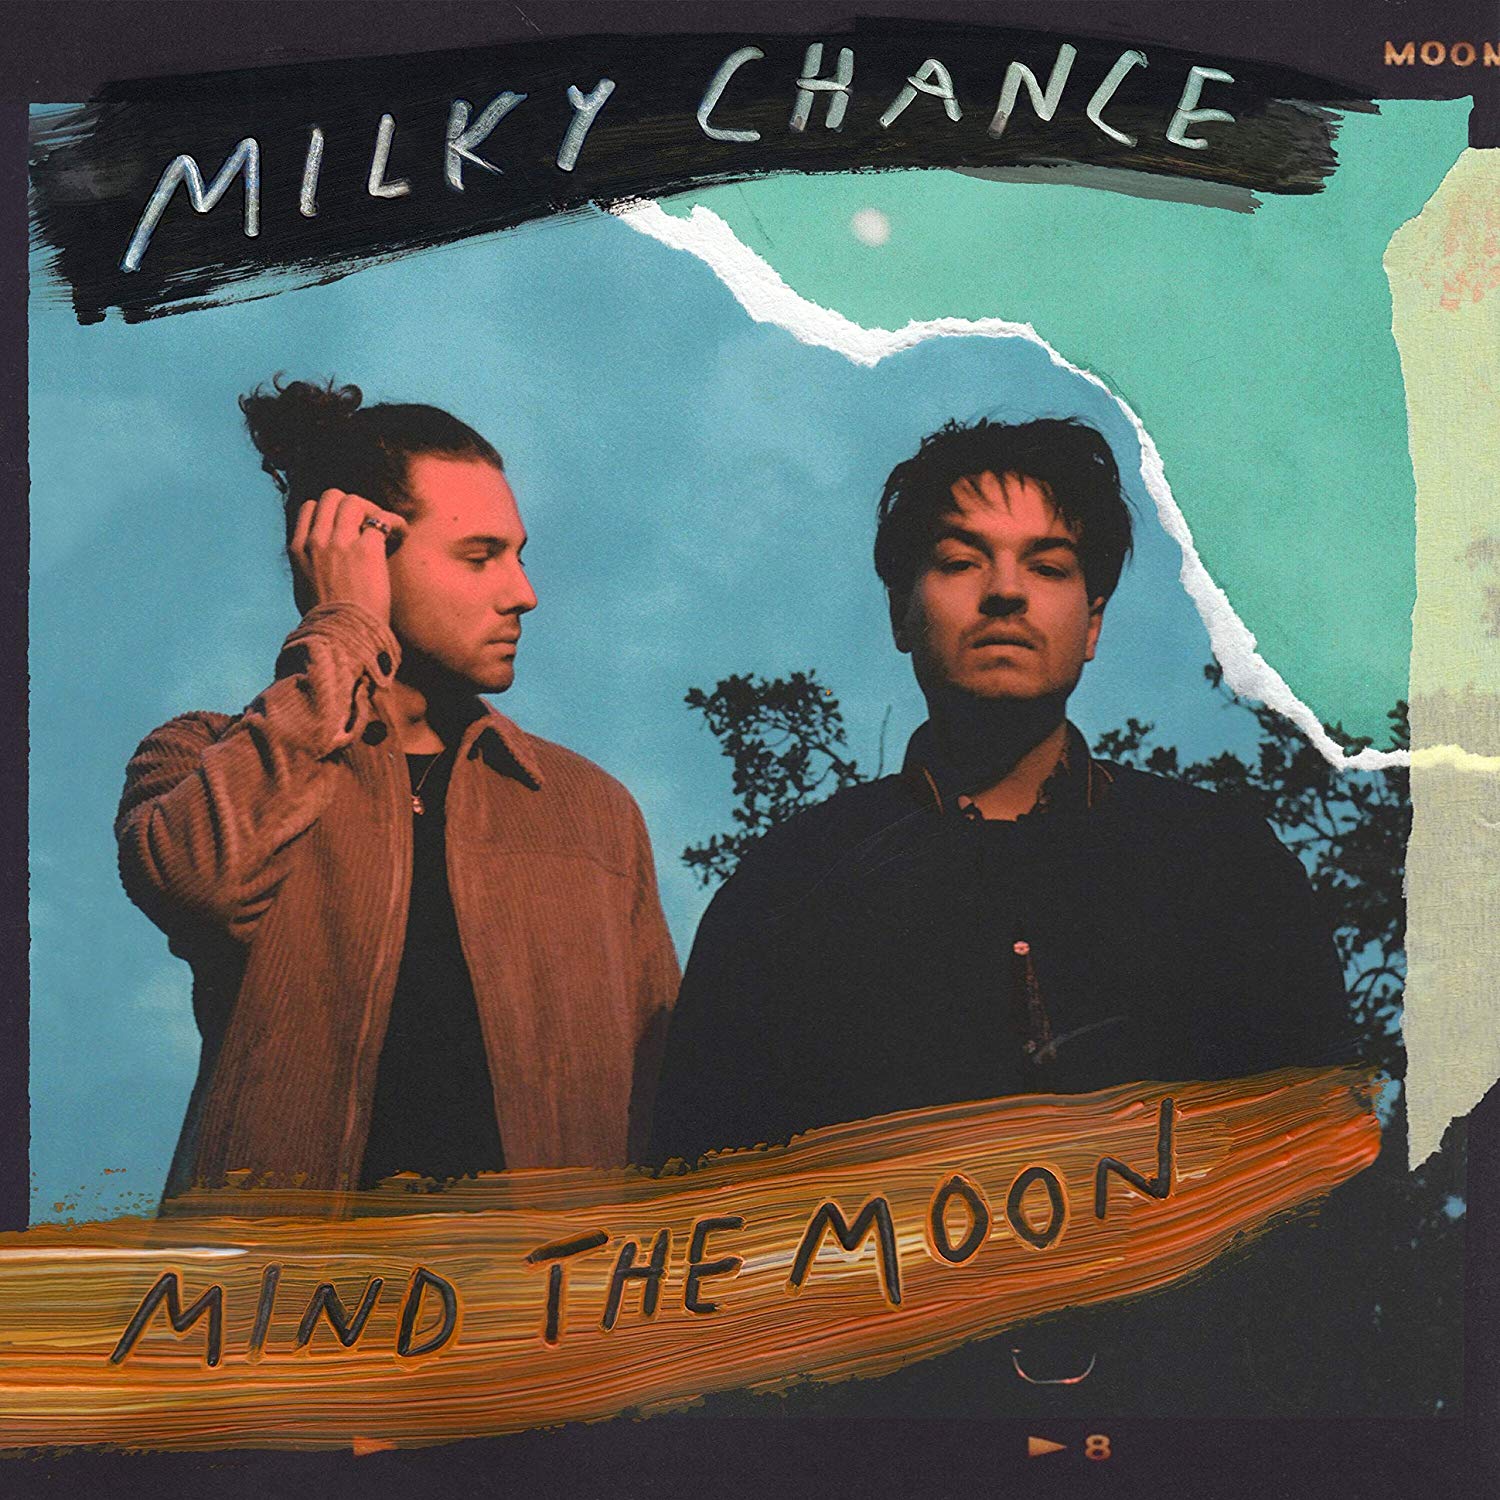 CD Shop - MILKY CHANCE MIND THE MOON